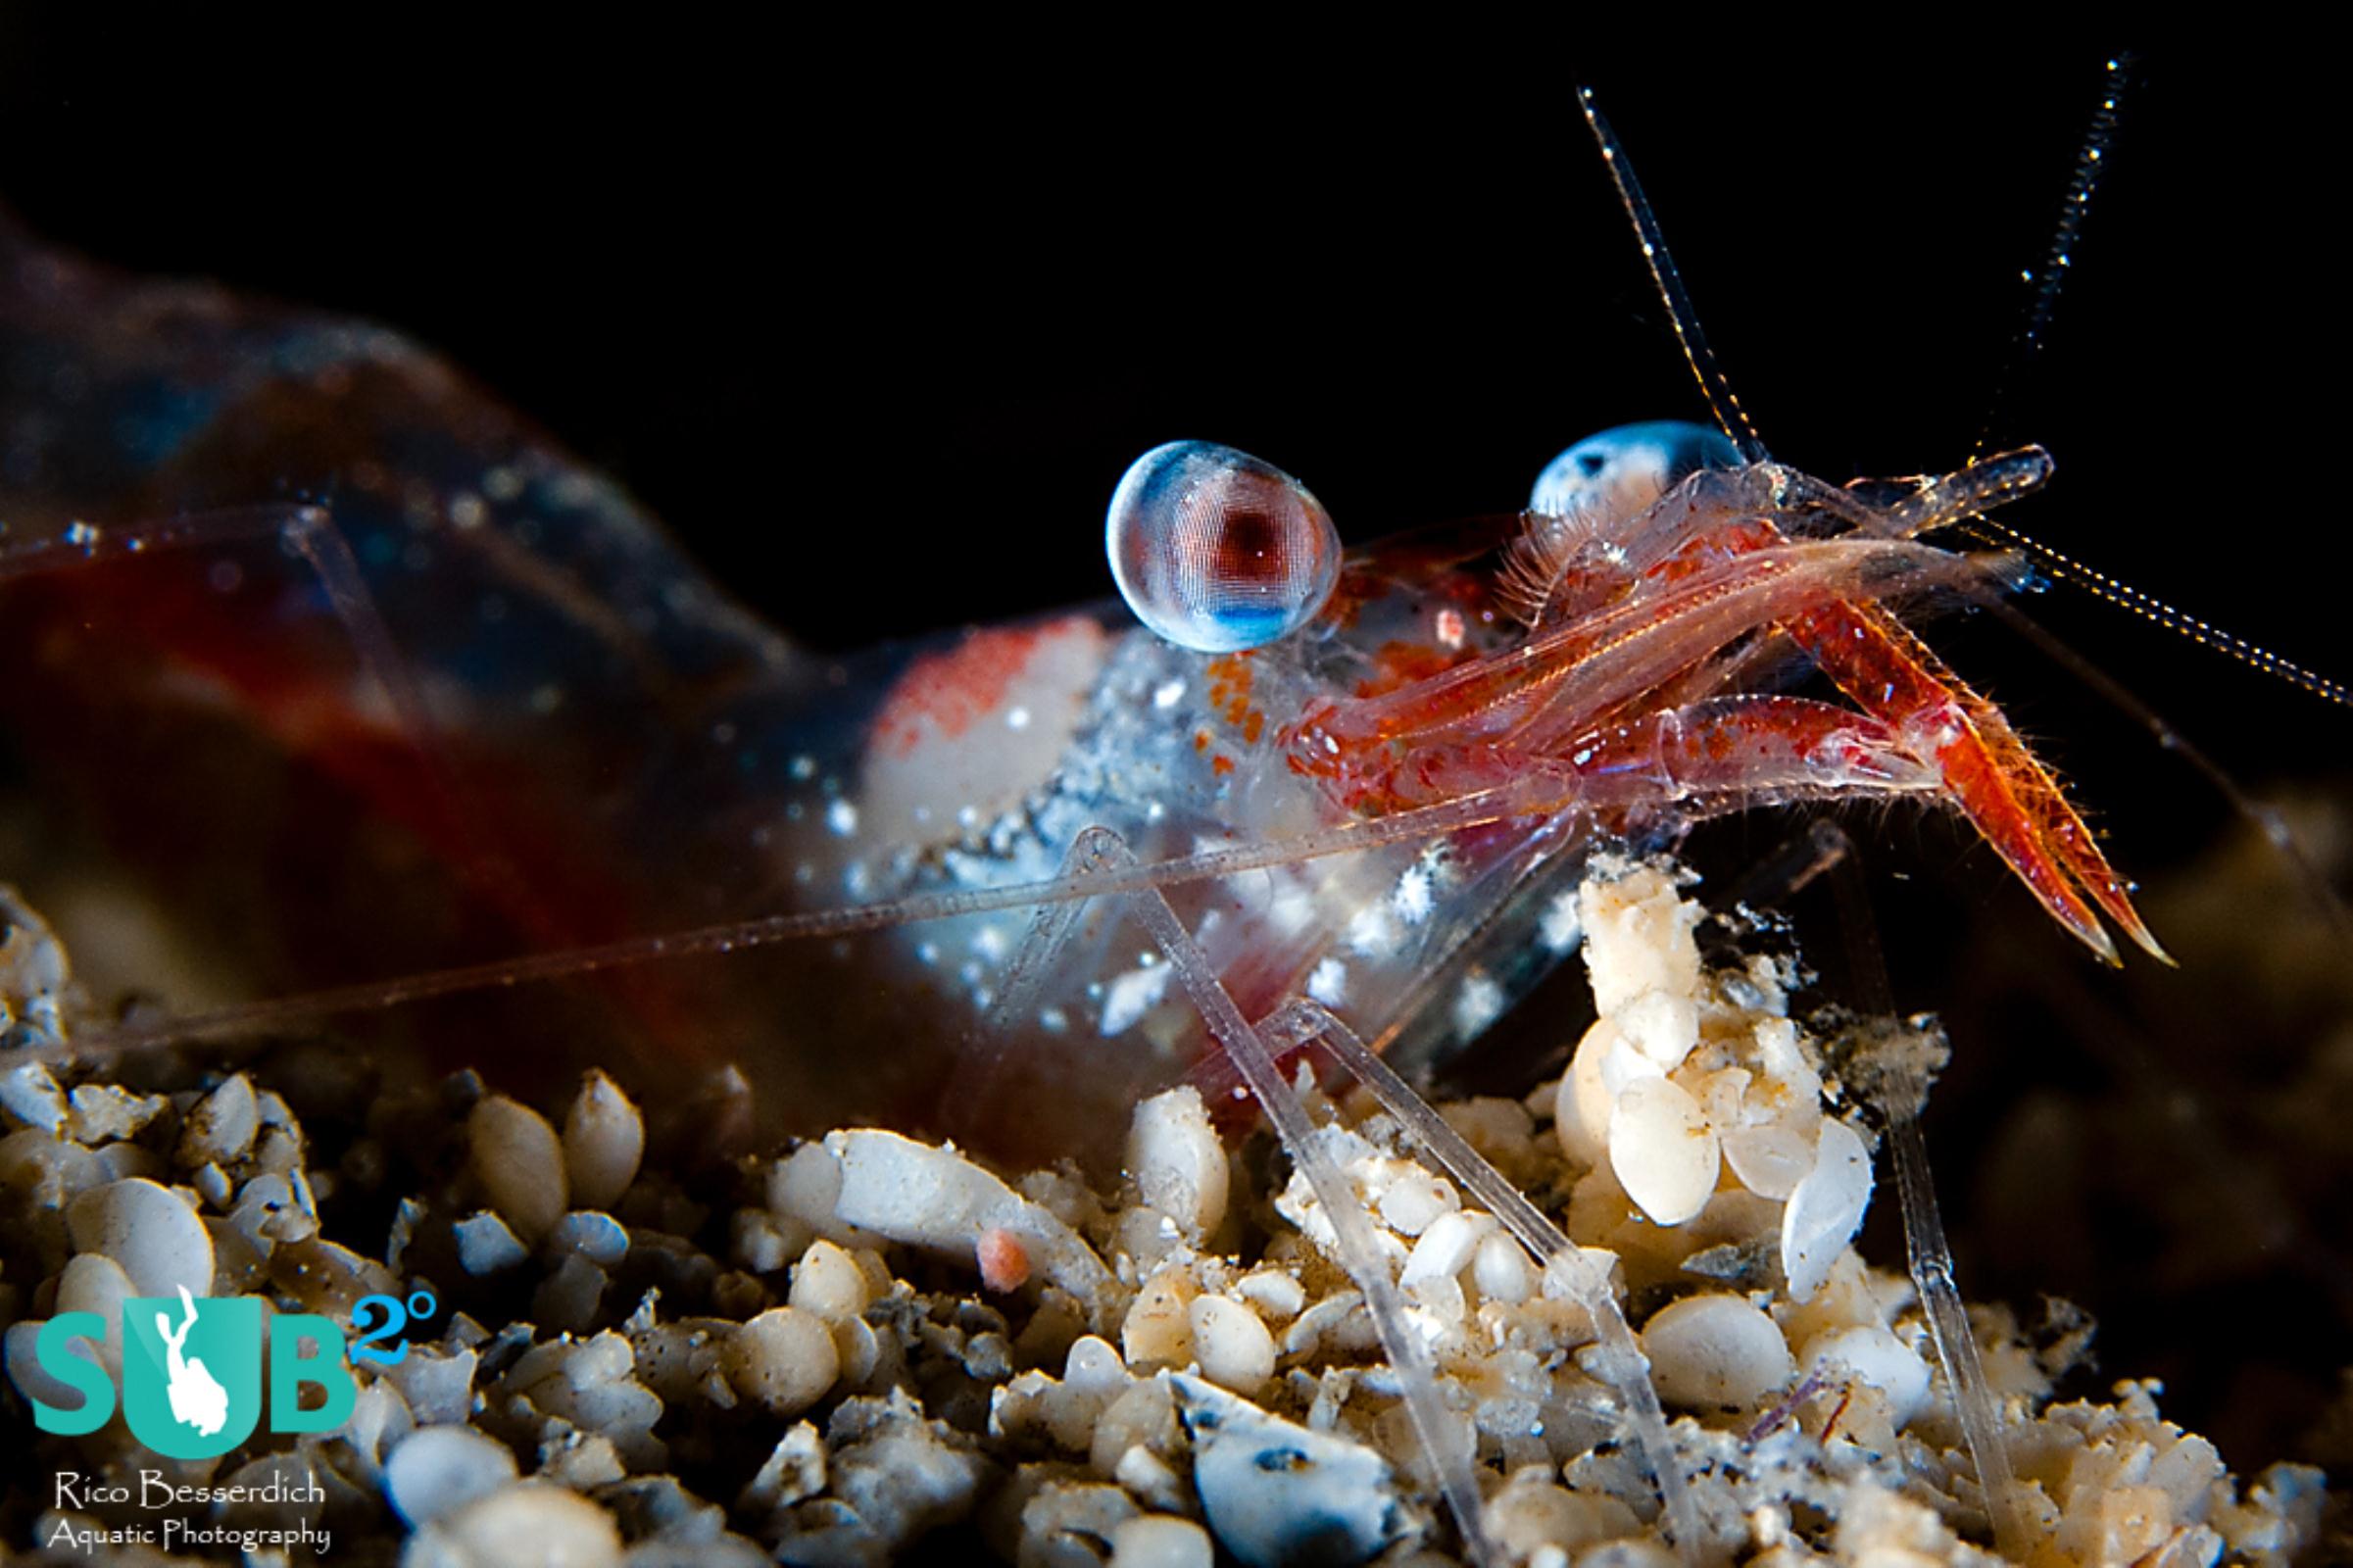 Shrimps are sometimes nervous small buddies that need quite the patience to achieve a proper photograph. 